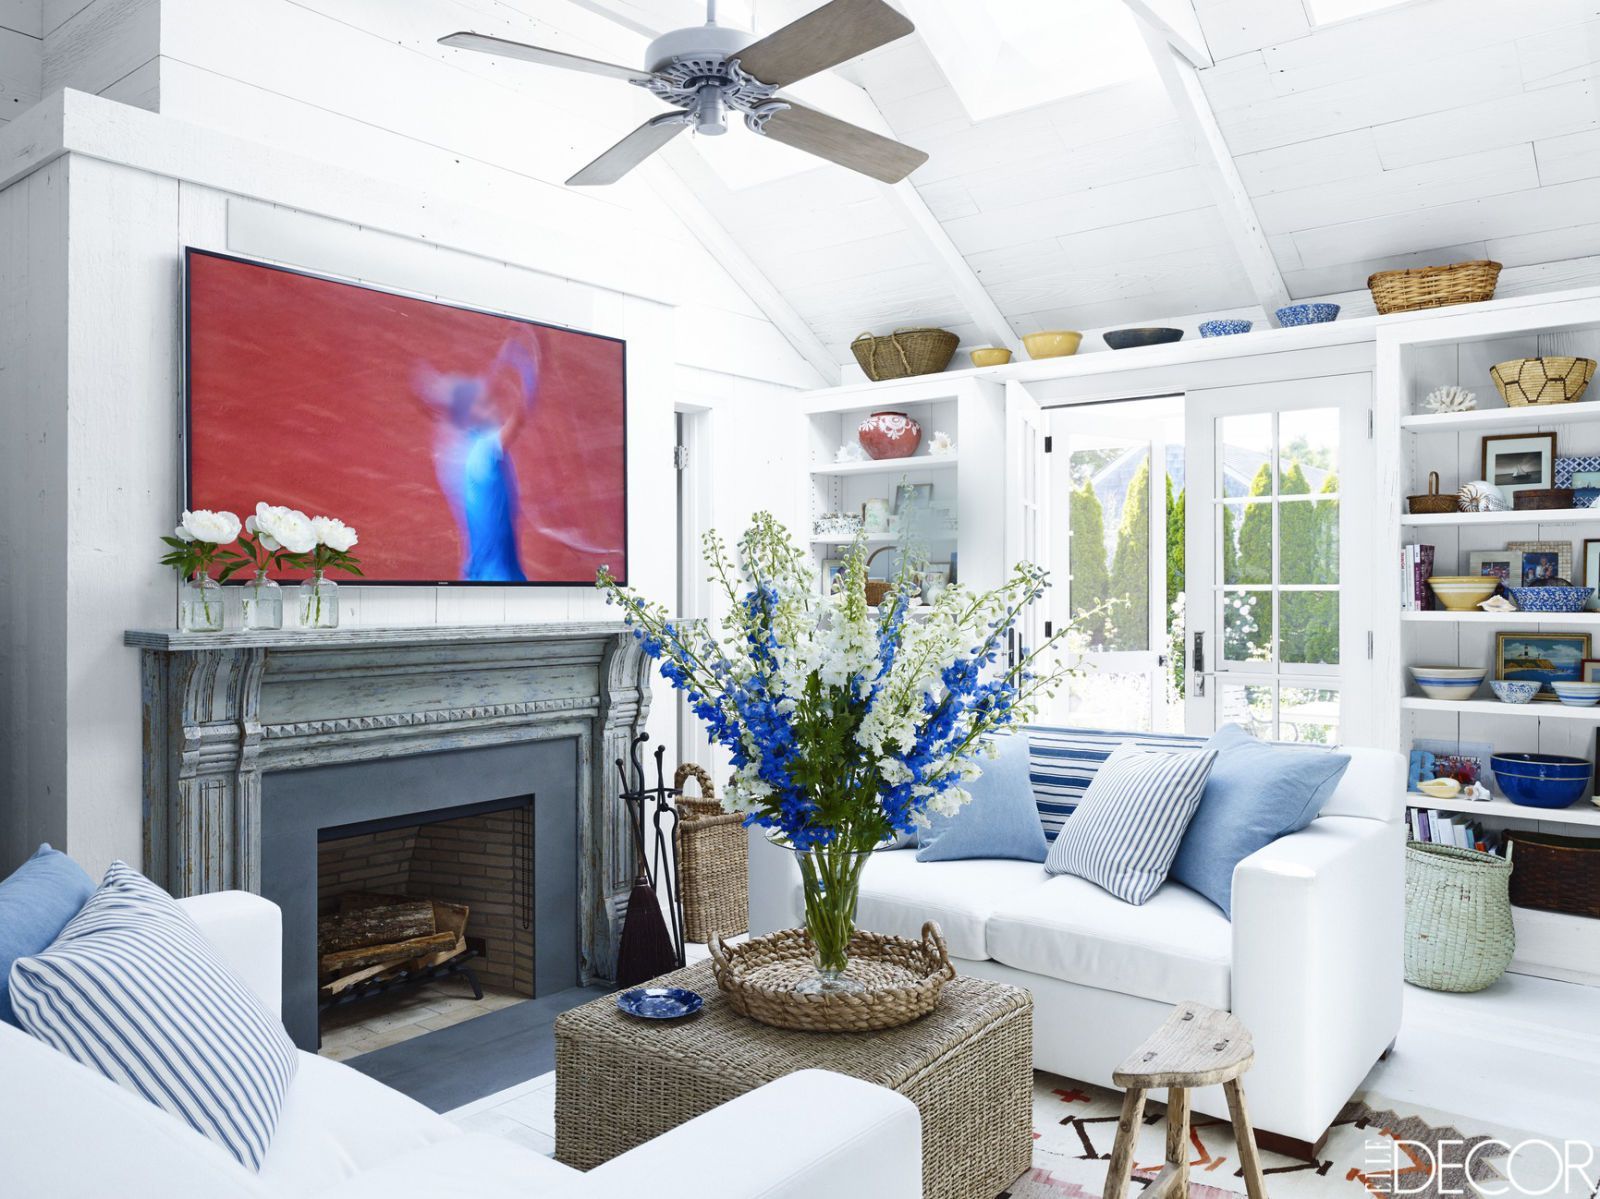 Does Beach House Decor Have To Look Coastal? - Laurel Home